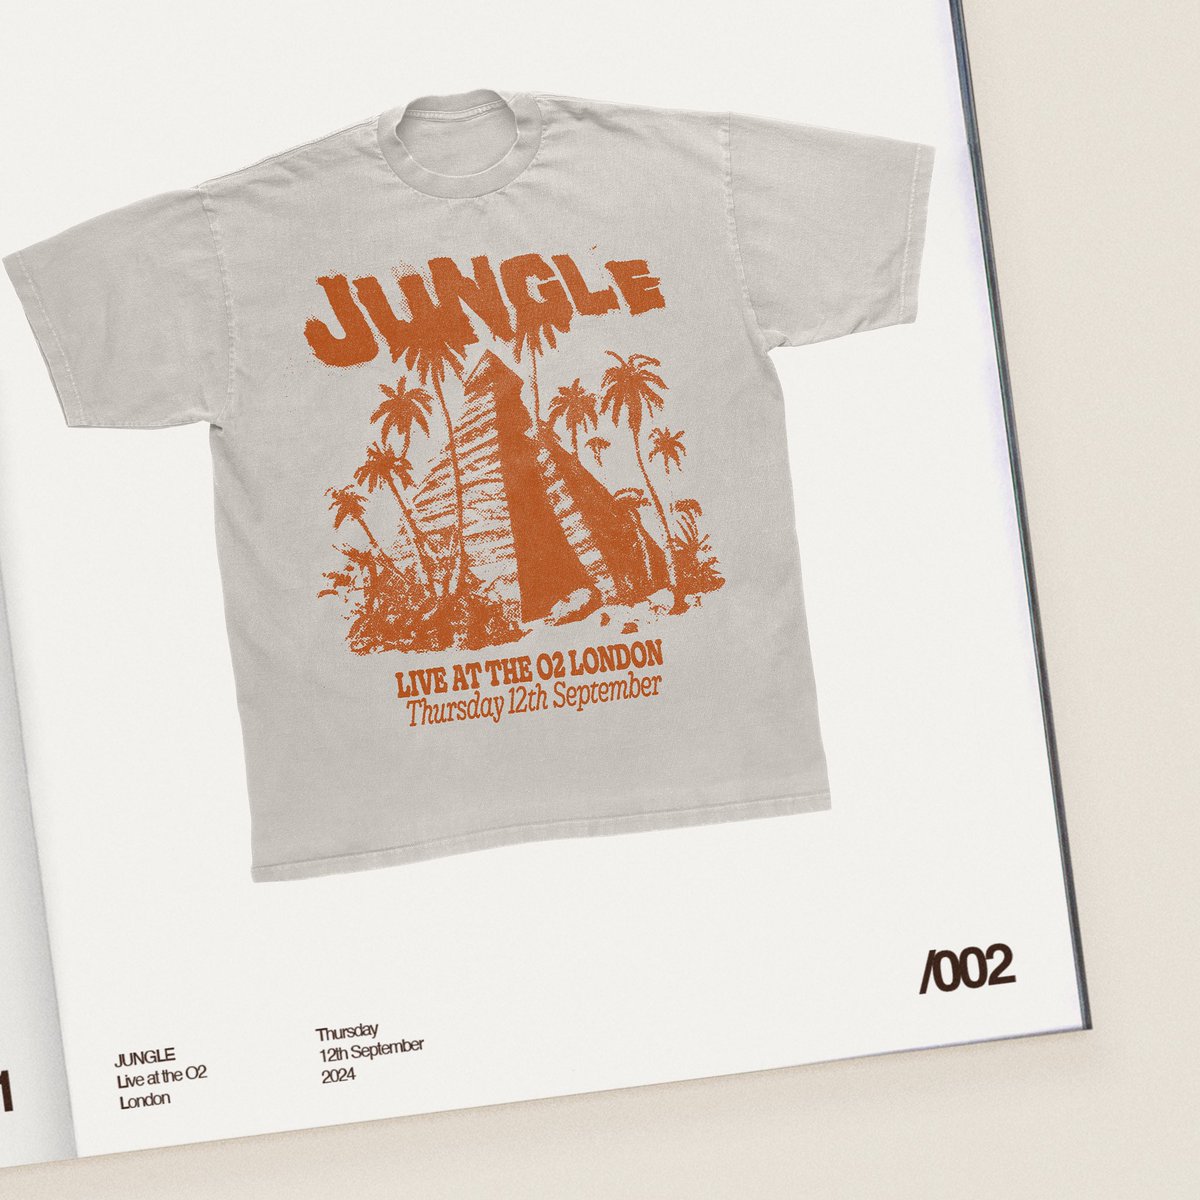 London 🇬🇧 We're playing The O2 on 12th September. For exclusive access to pre-sale tickets, sign up to the Jungle Fan Club 🌋😎 We've also launched some bespoke t-shirts for the show, on sale now via our official store 🌴 JFC - jungle.ffm.to/jfc